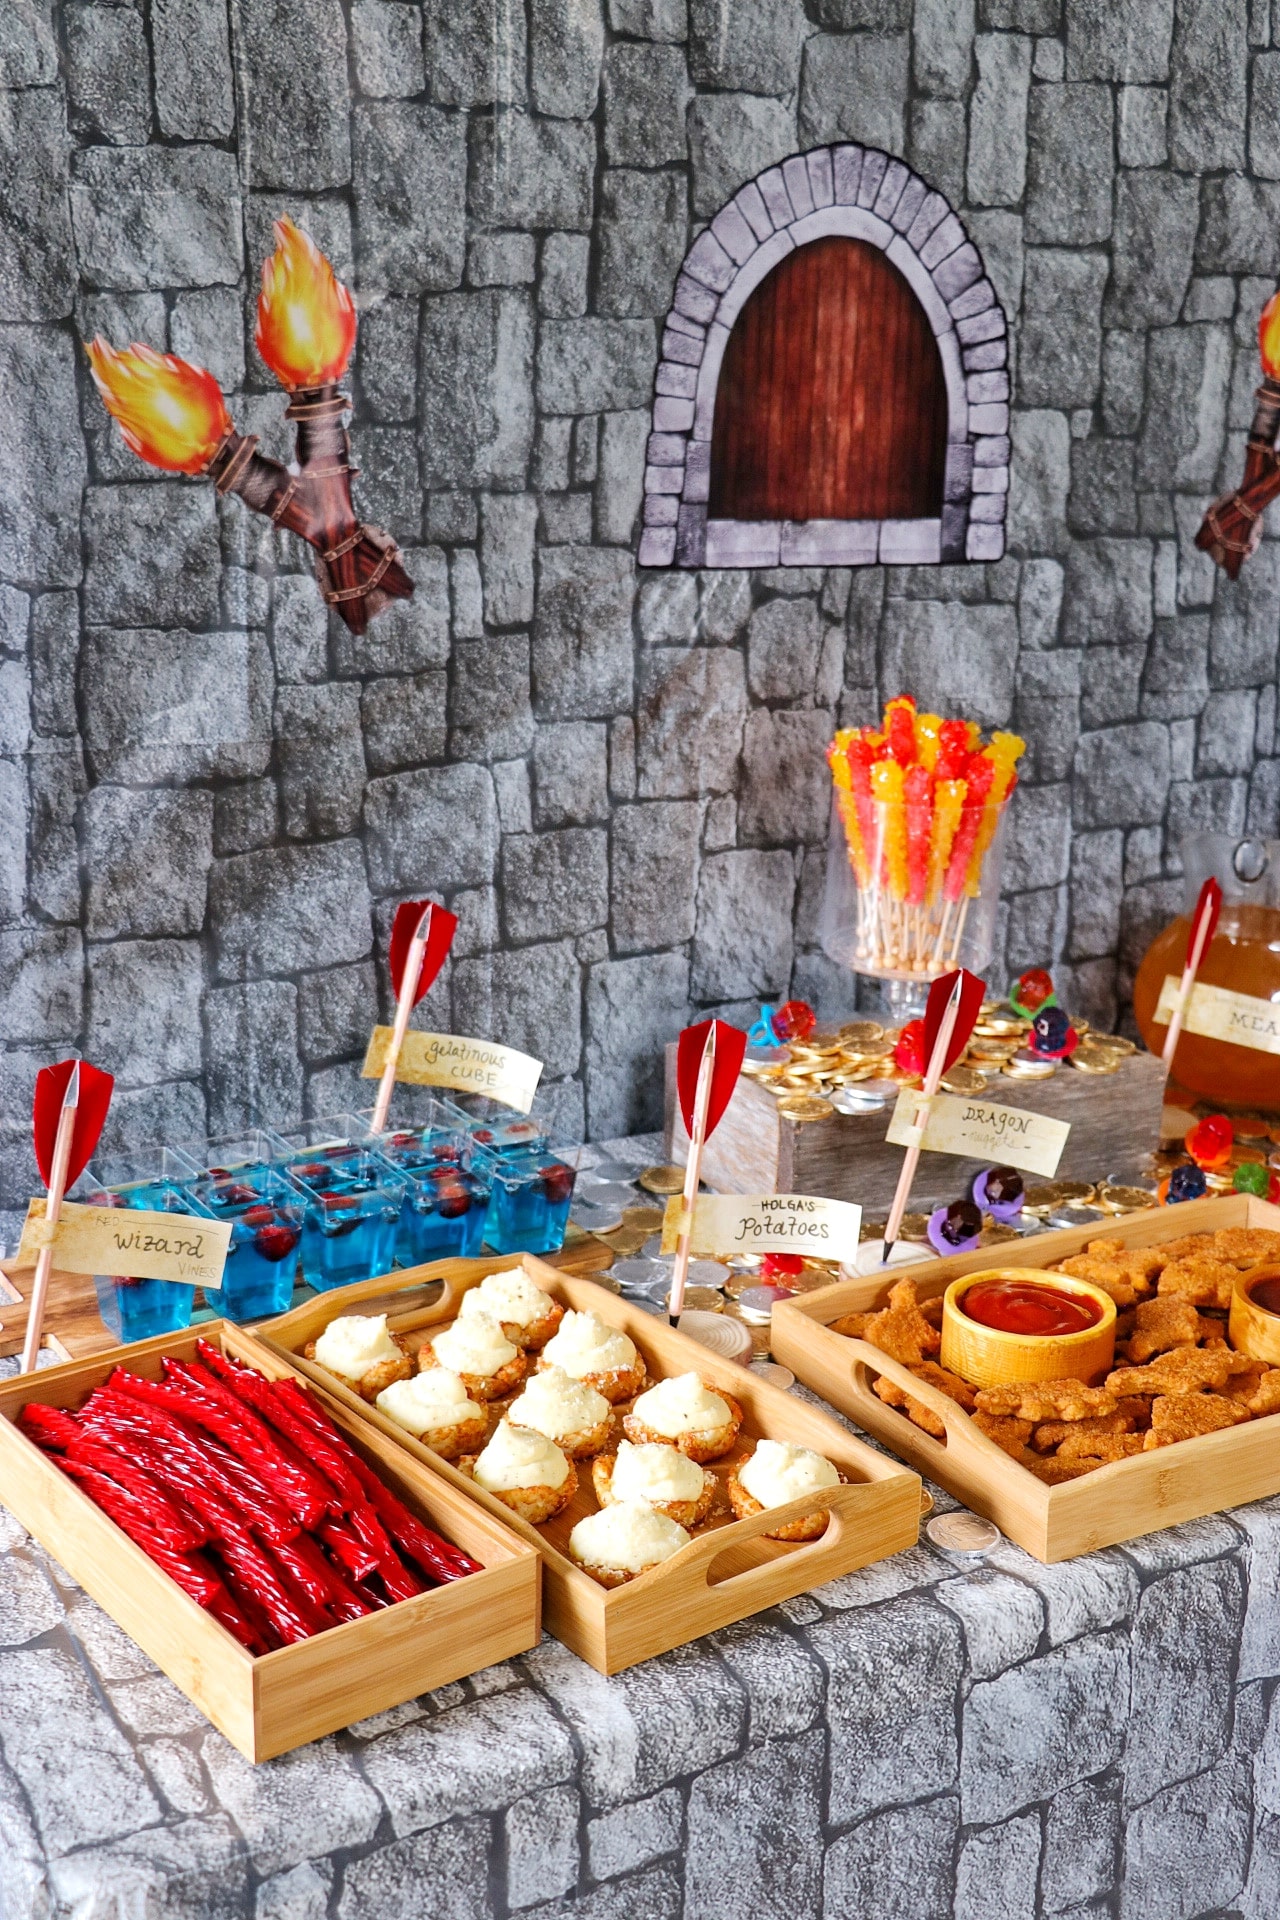 Dungeons and Dragons themed snacks